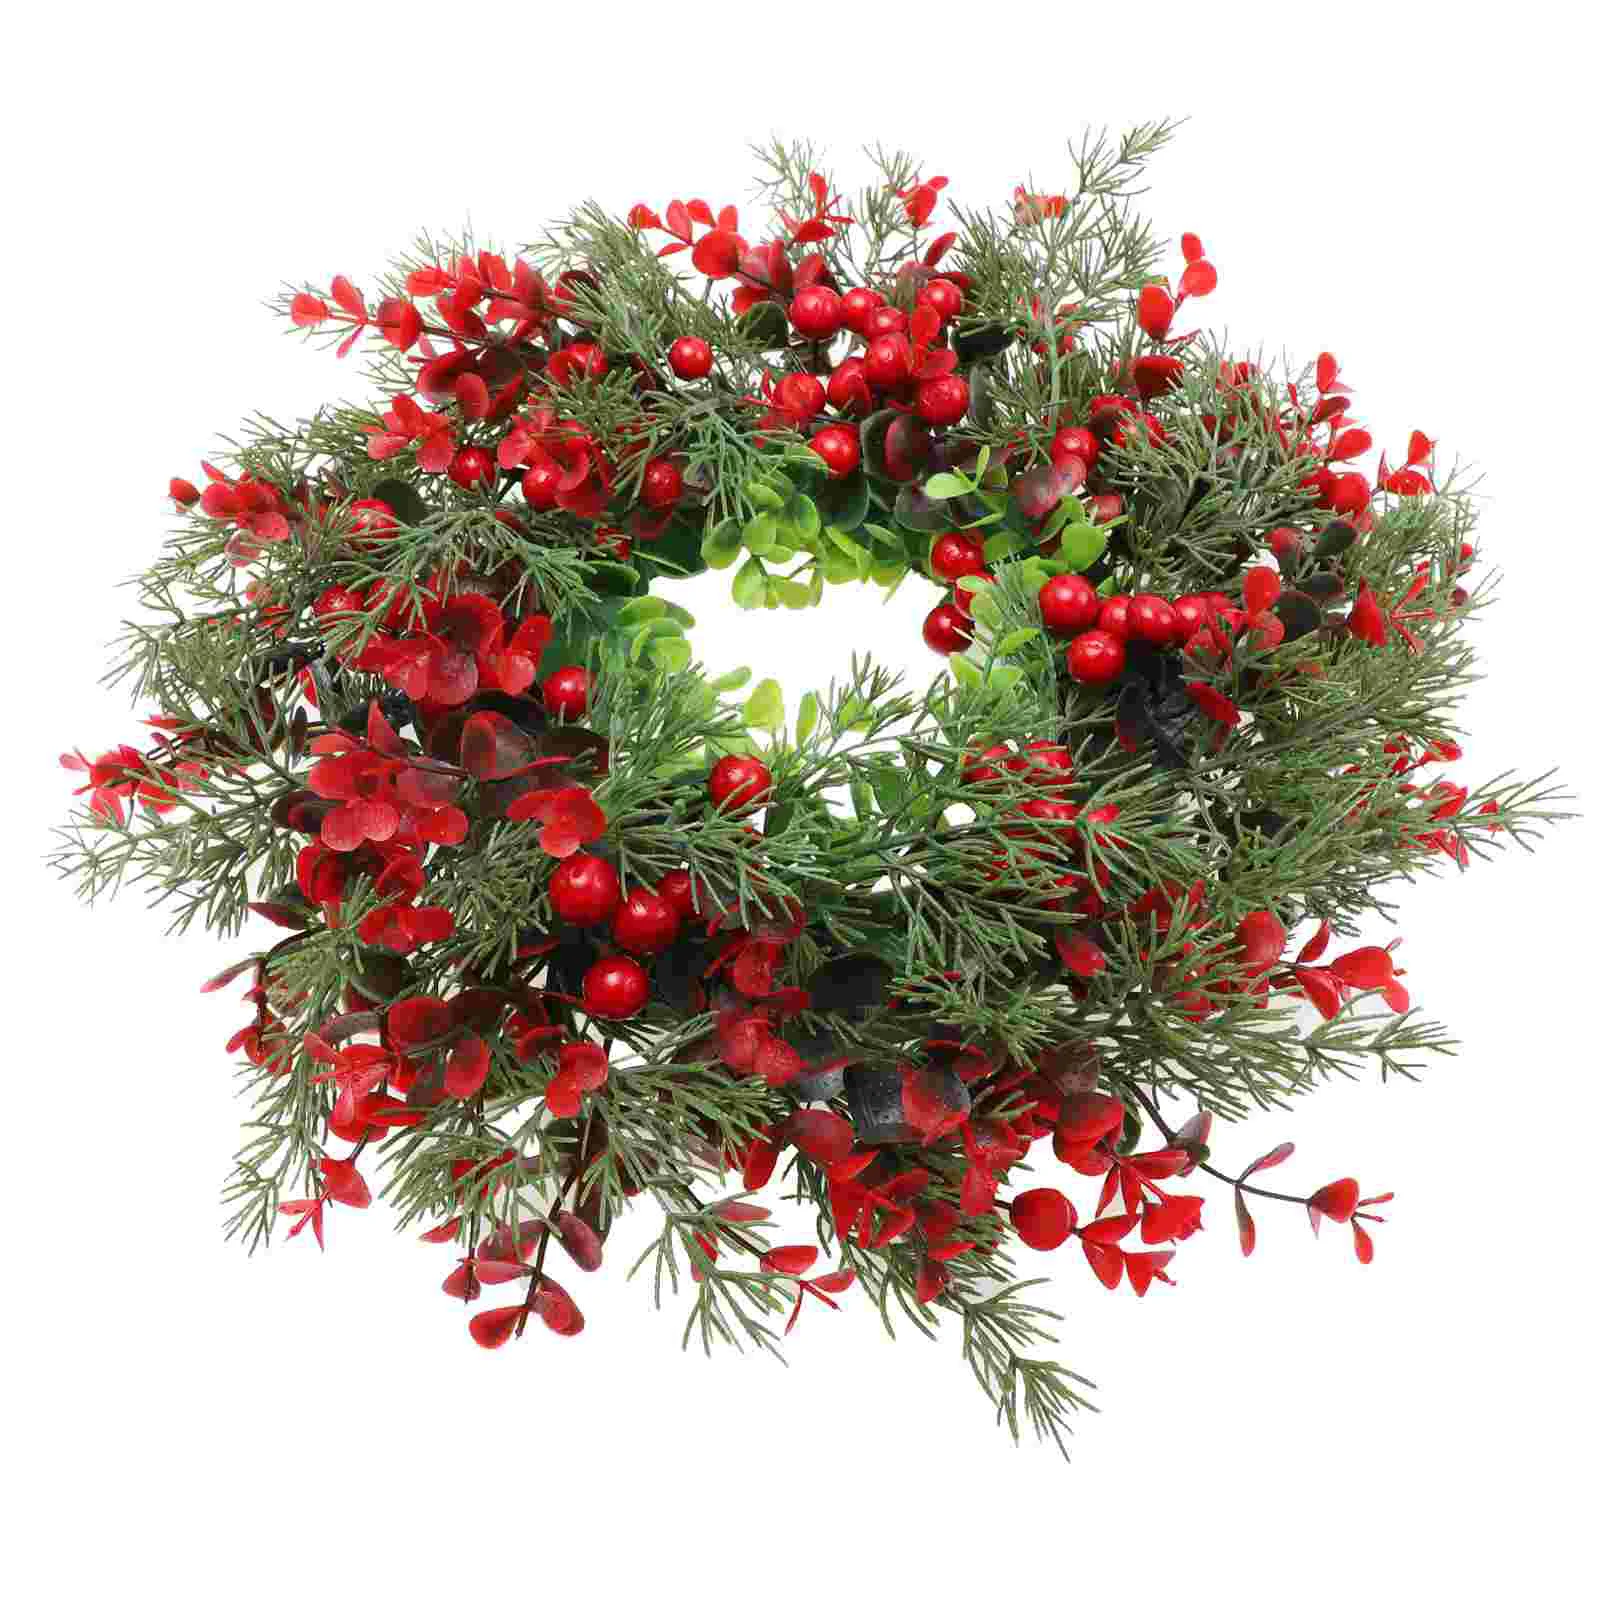 

Wreath Christmas Door Berry Wreaths Front Artificial Garland Red Outdoor Winter Pine Holiday Decor Hanging Holly Windows Pendant